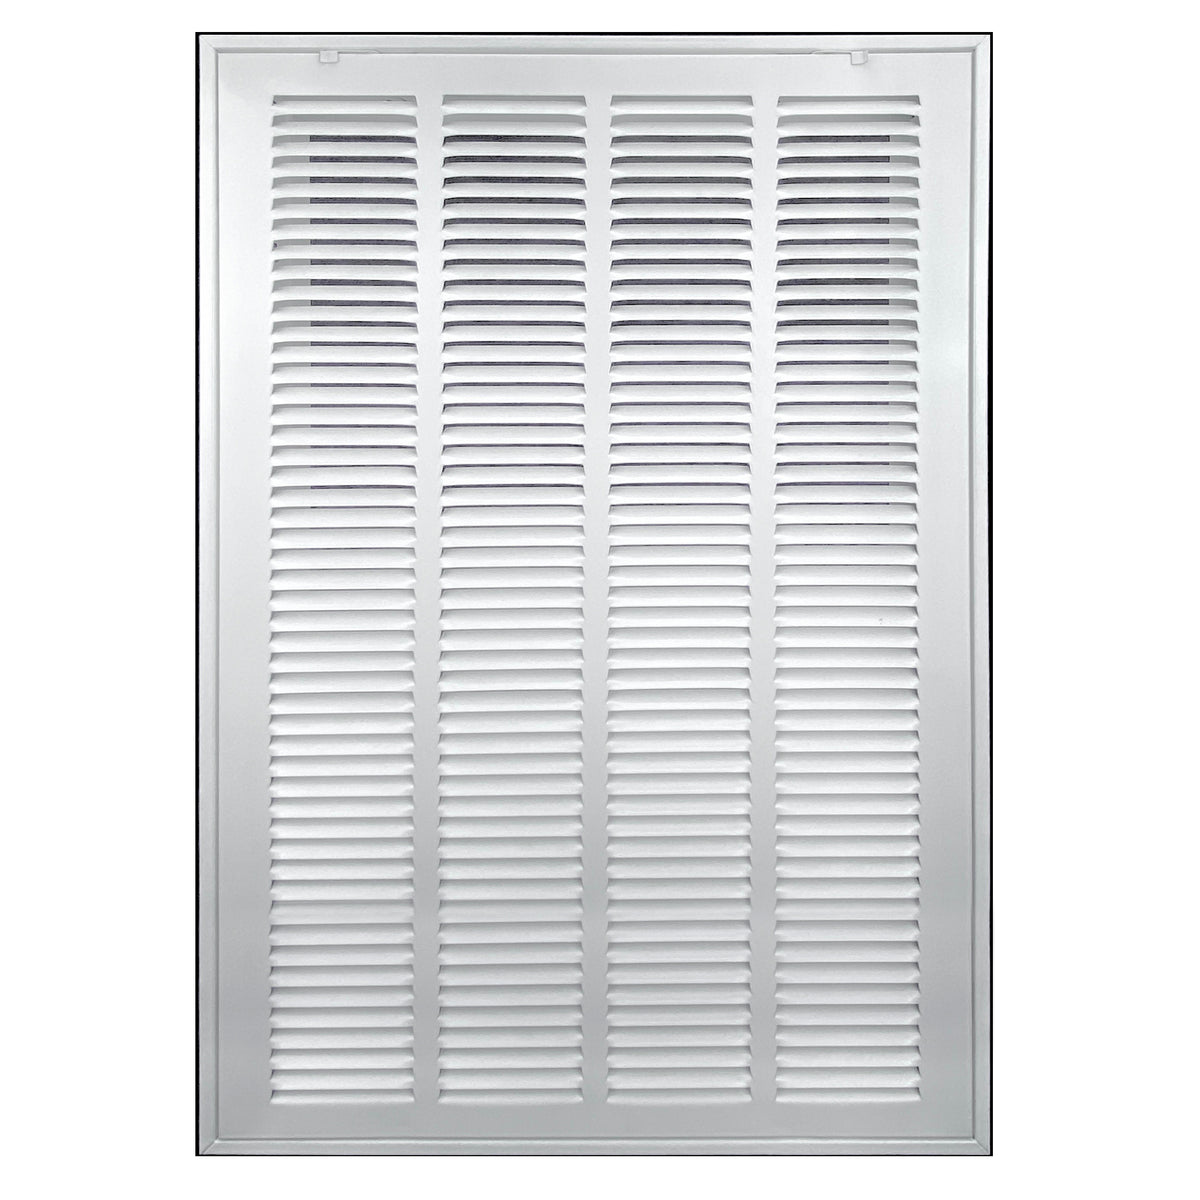 airgrilles 20" x 25" duct opening   hd steel return air filter grille for sidewall and ceiling 7hnd-rfg1-wh-20x25 038775638371 - 1